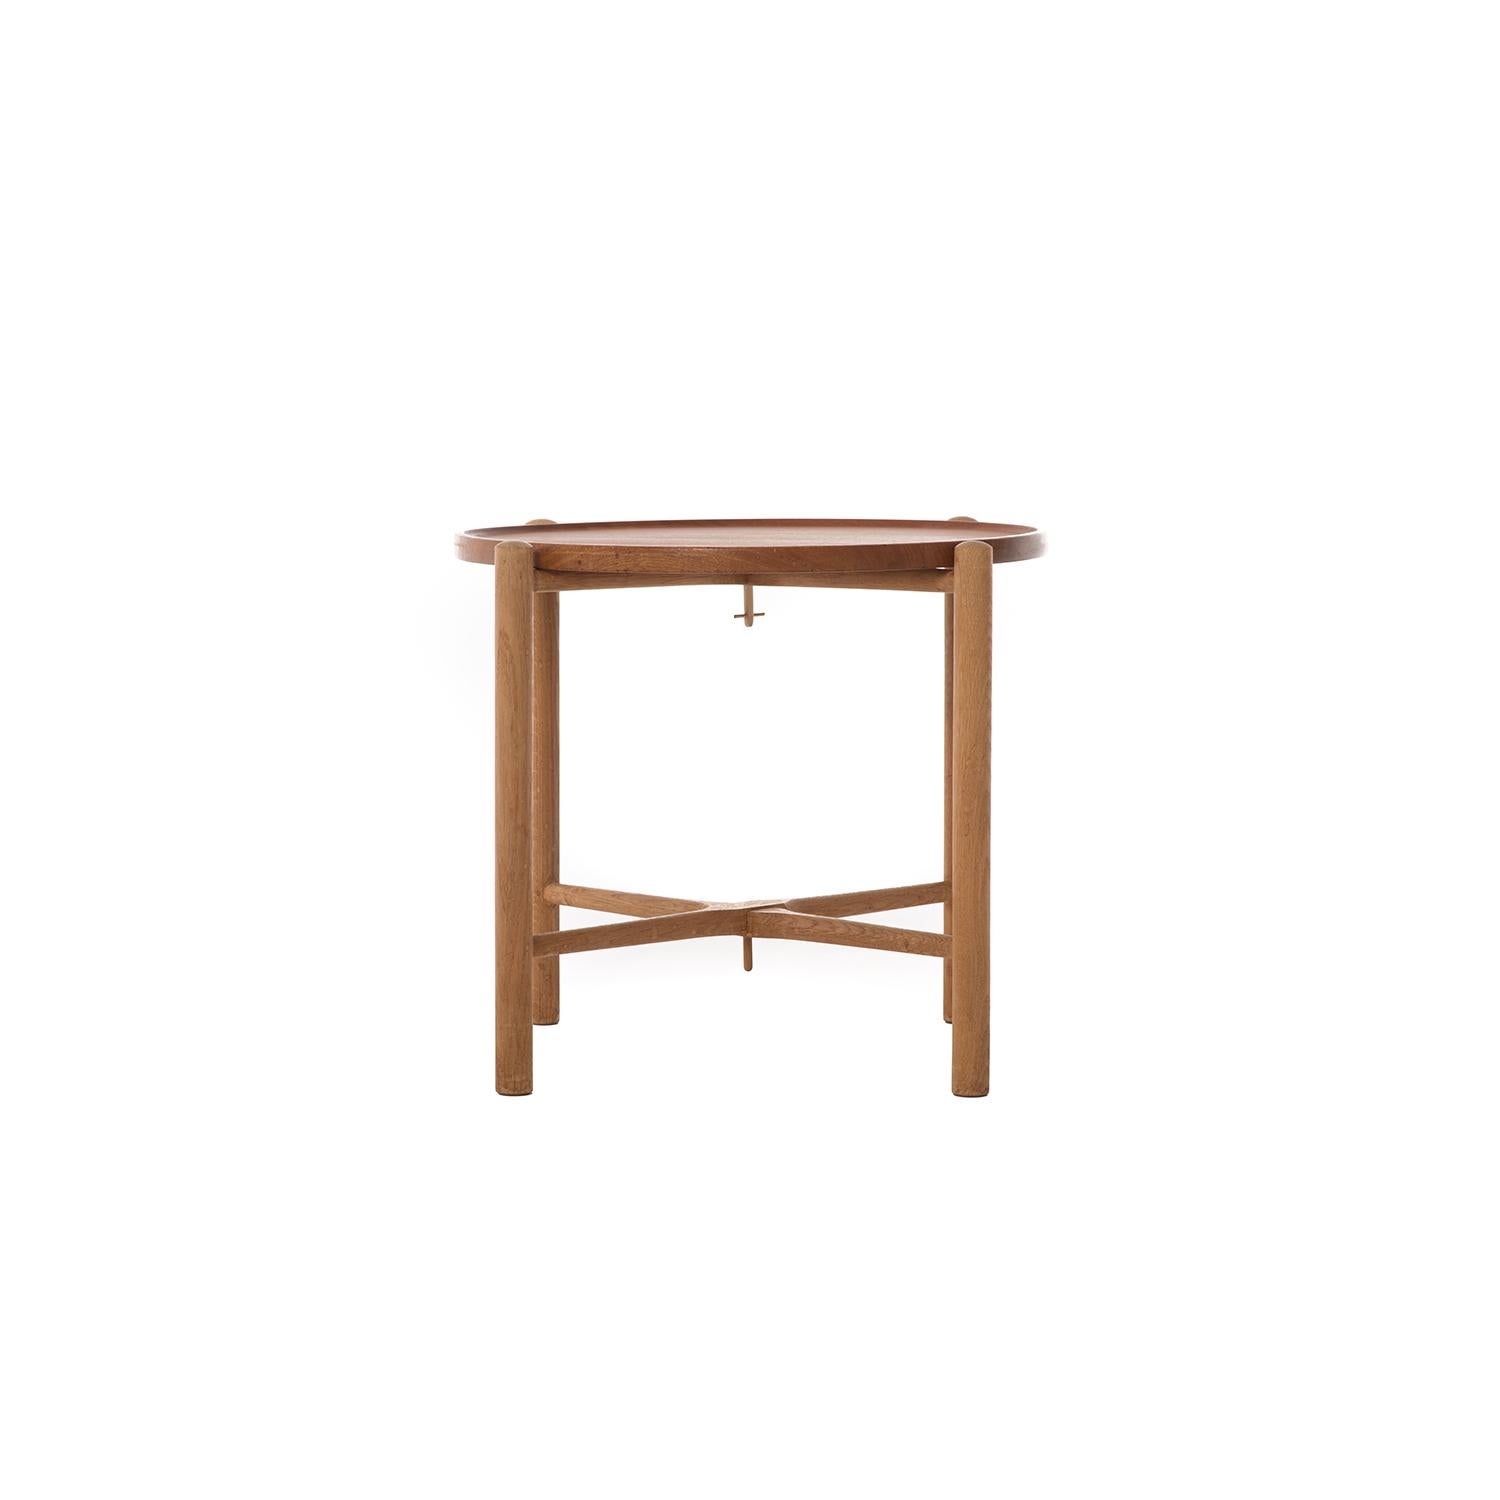 This Danish modern original table is made from solid old growth teak and white oak. The tabletop is reversible and can be used as a tray, the base folds in two. Portable and easily storable, and notably beautiful as well! Hans J. Wegner drives it